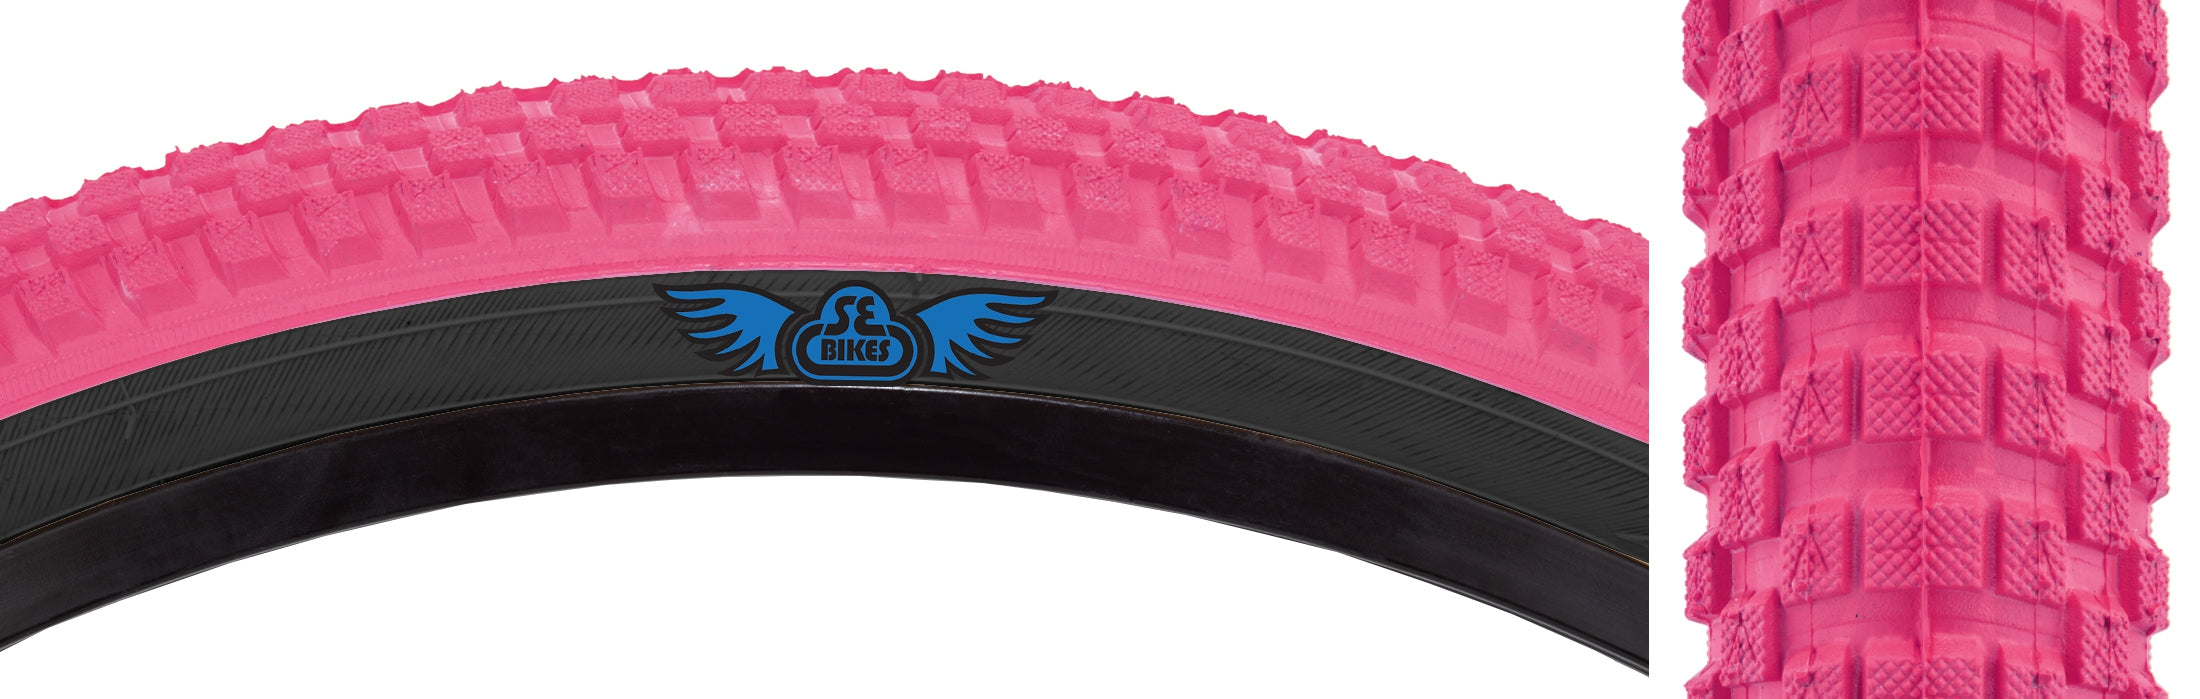 side view of cub tire in pink